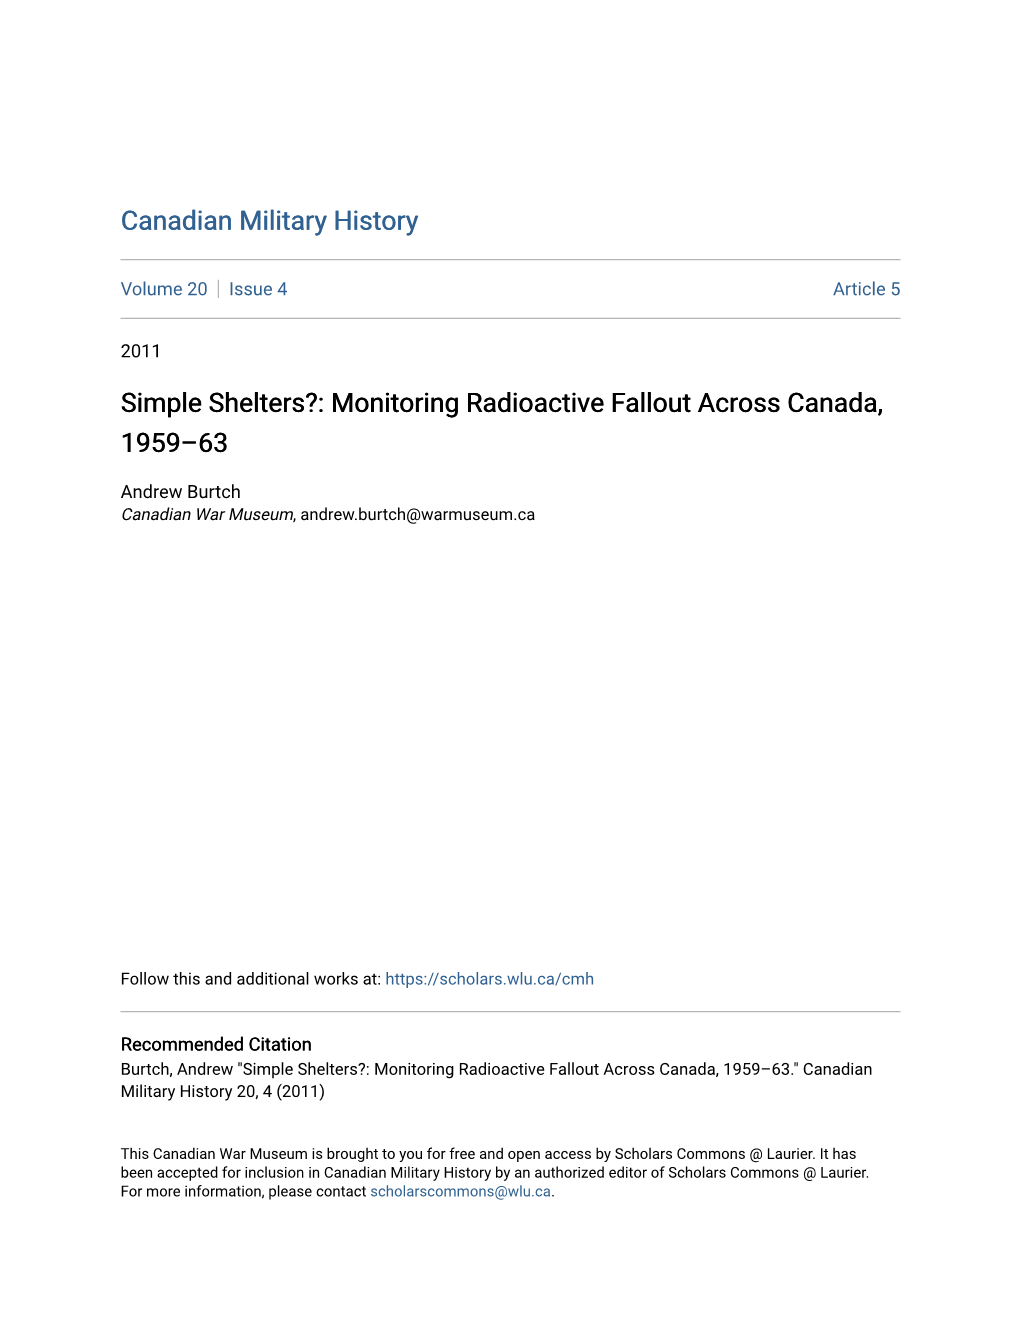 Simple Shelters?: Monitoring Radioactive Fallout Across Canada, 1959–63